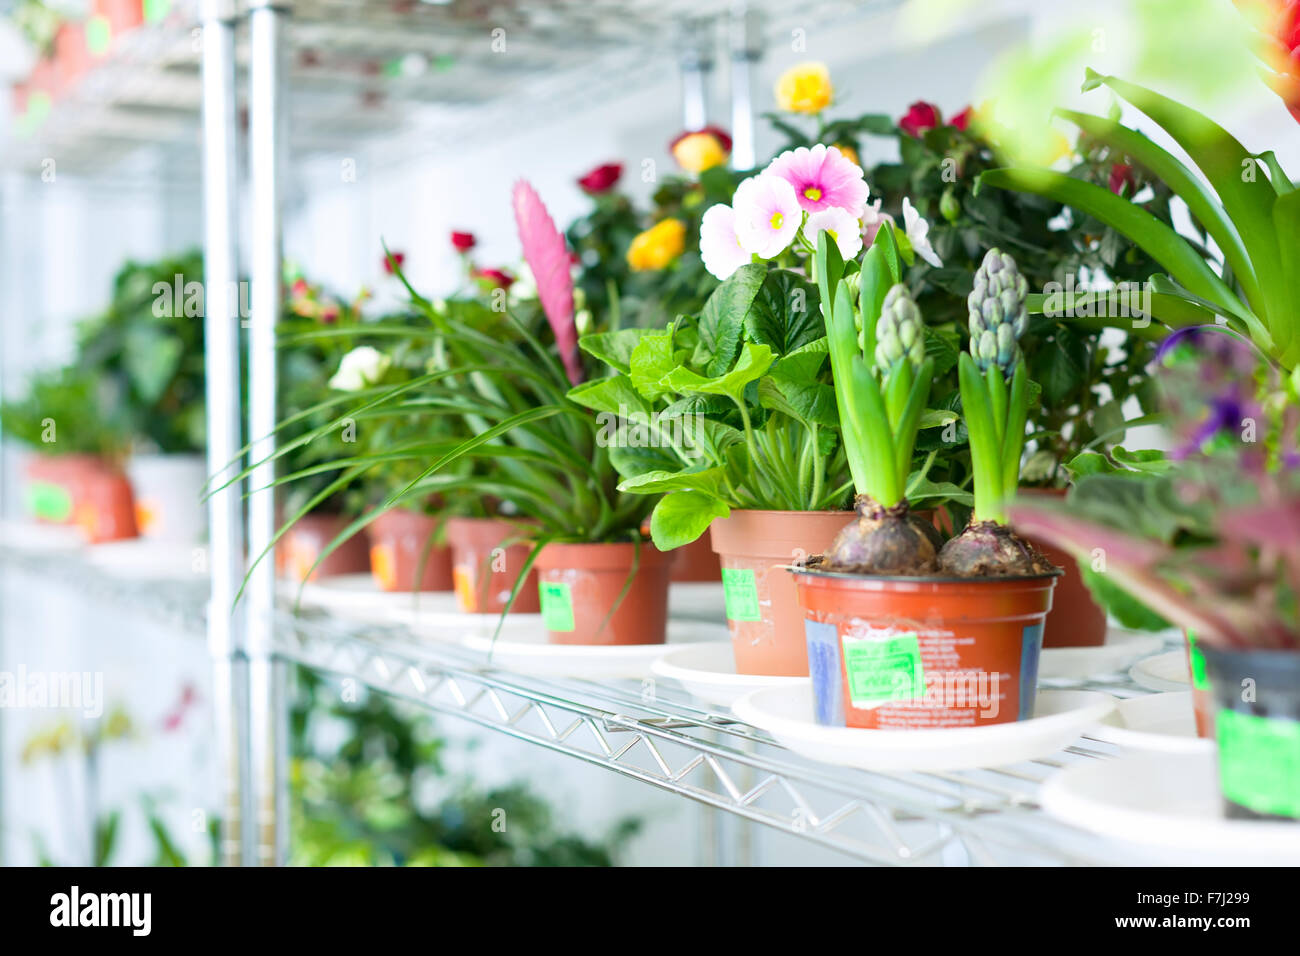 Shelves with different flowers in pots of flowers Stock Photo